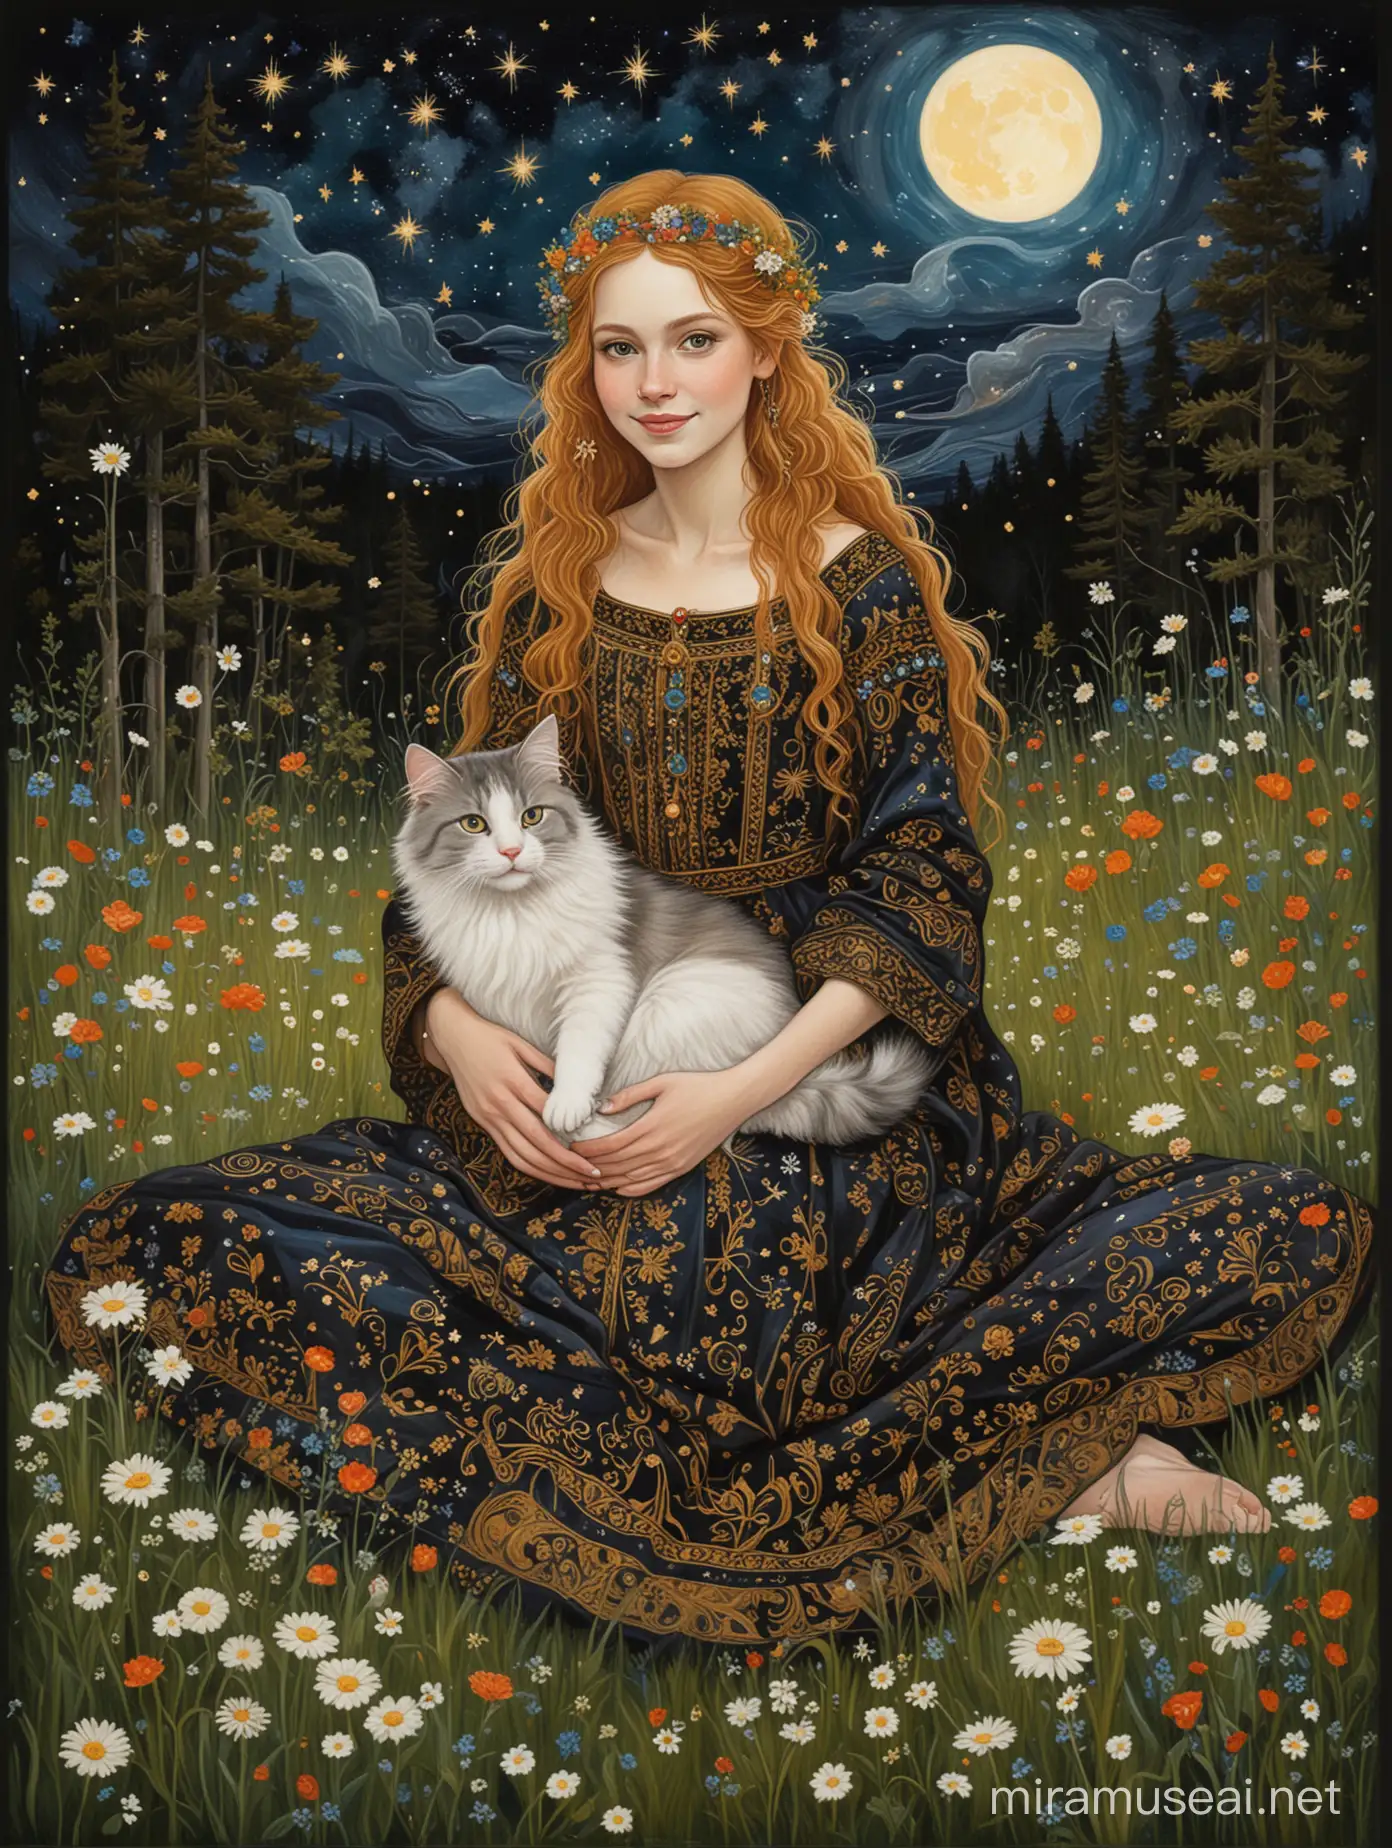 Smiling Medieval Elf with Norwegian Forest Cat under Starry Night Sky